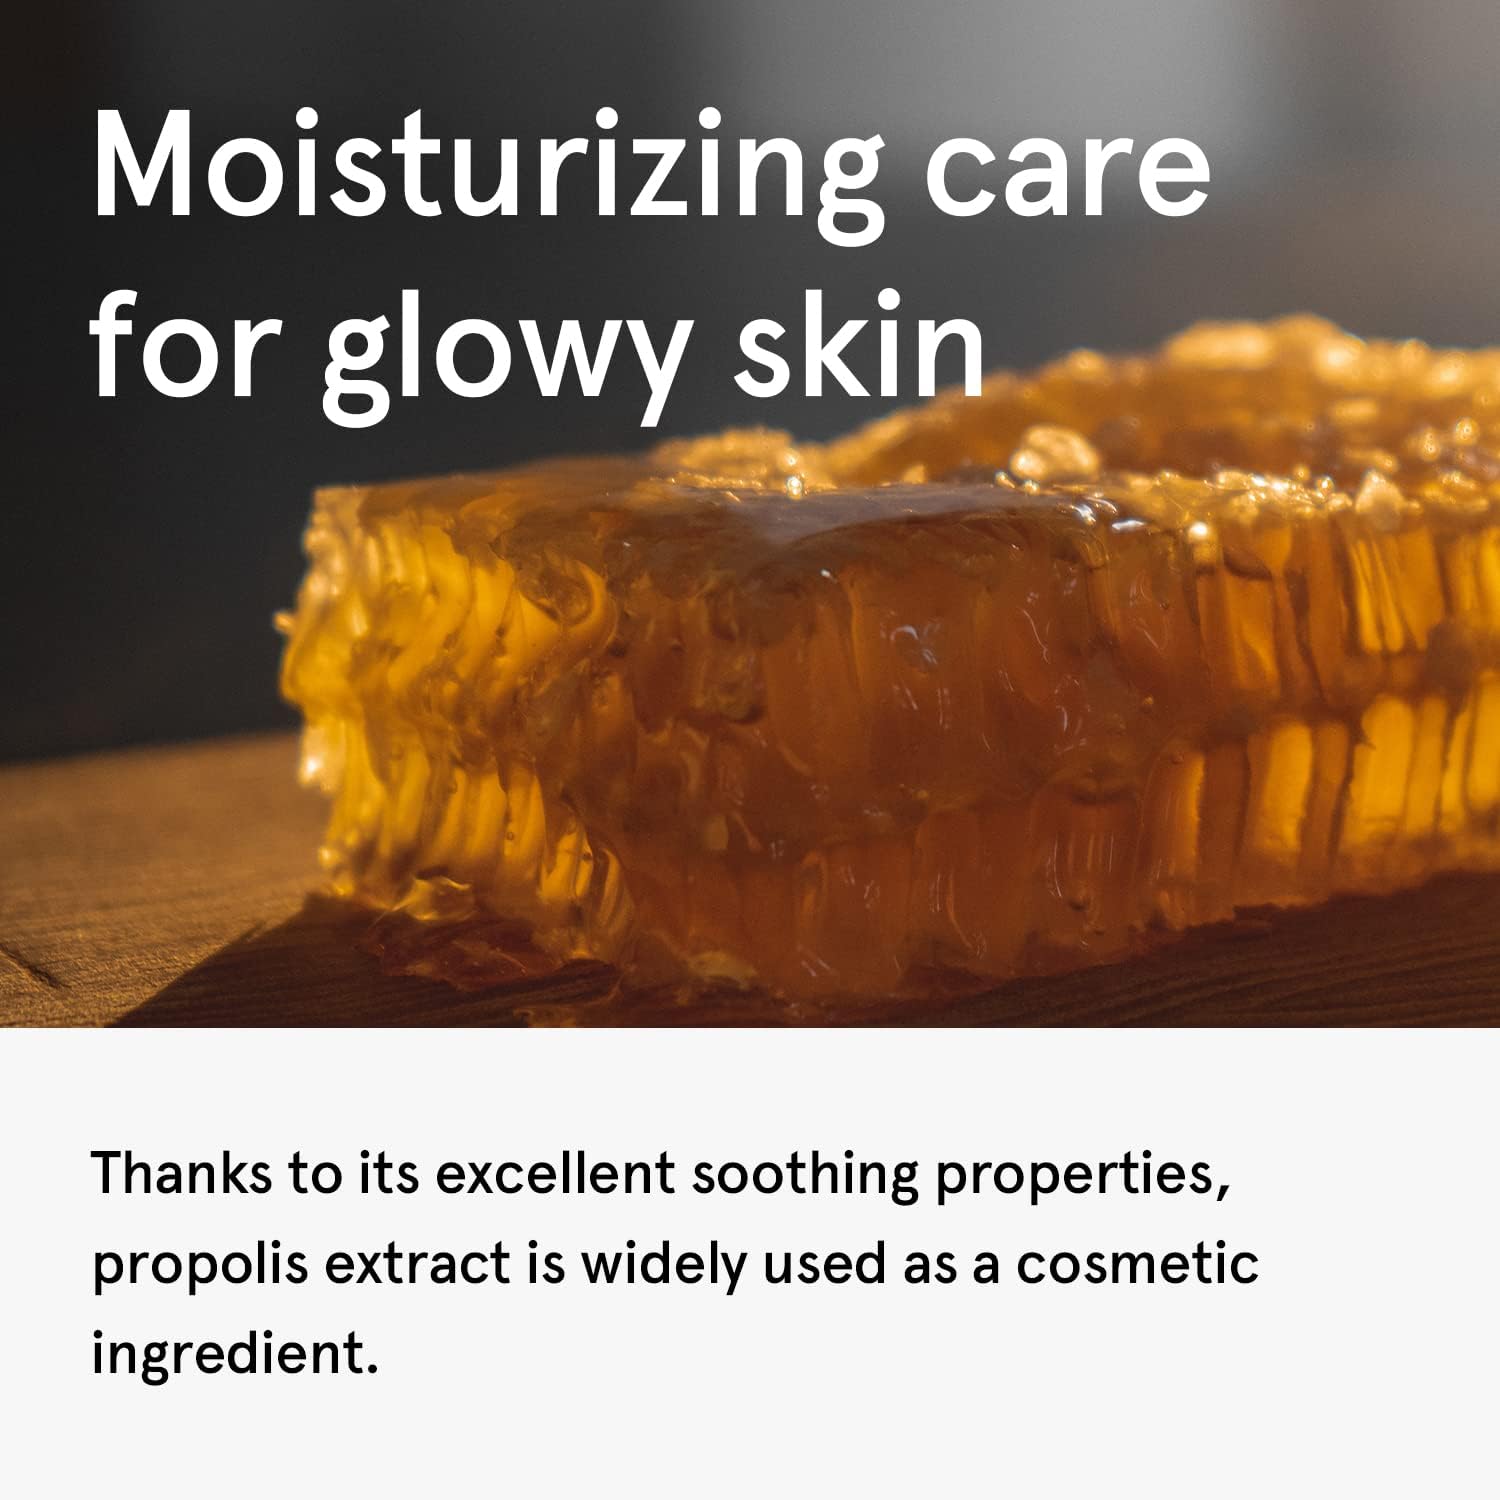 ONE THING Propolis + Honey Extract 150ml